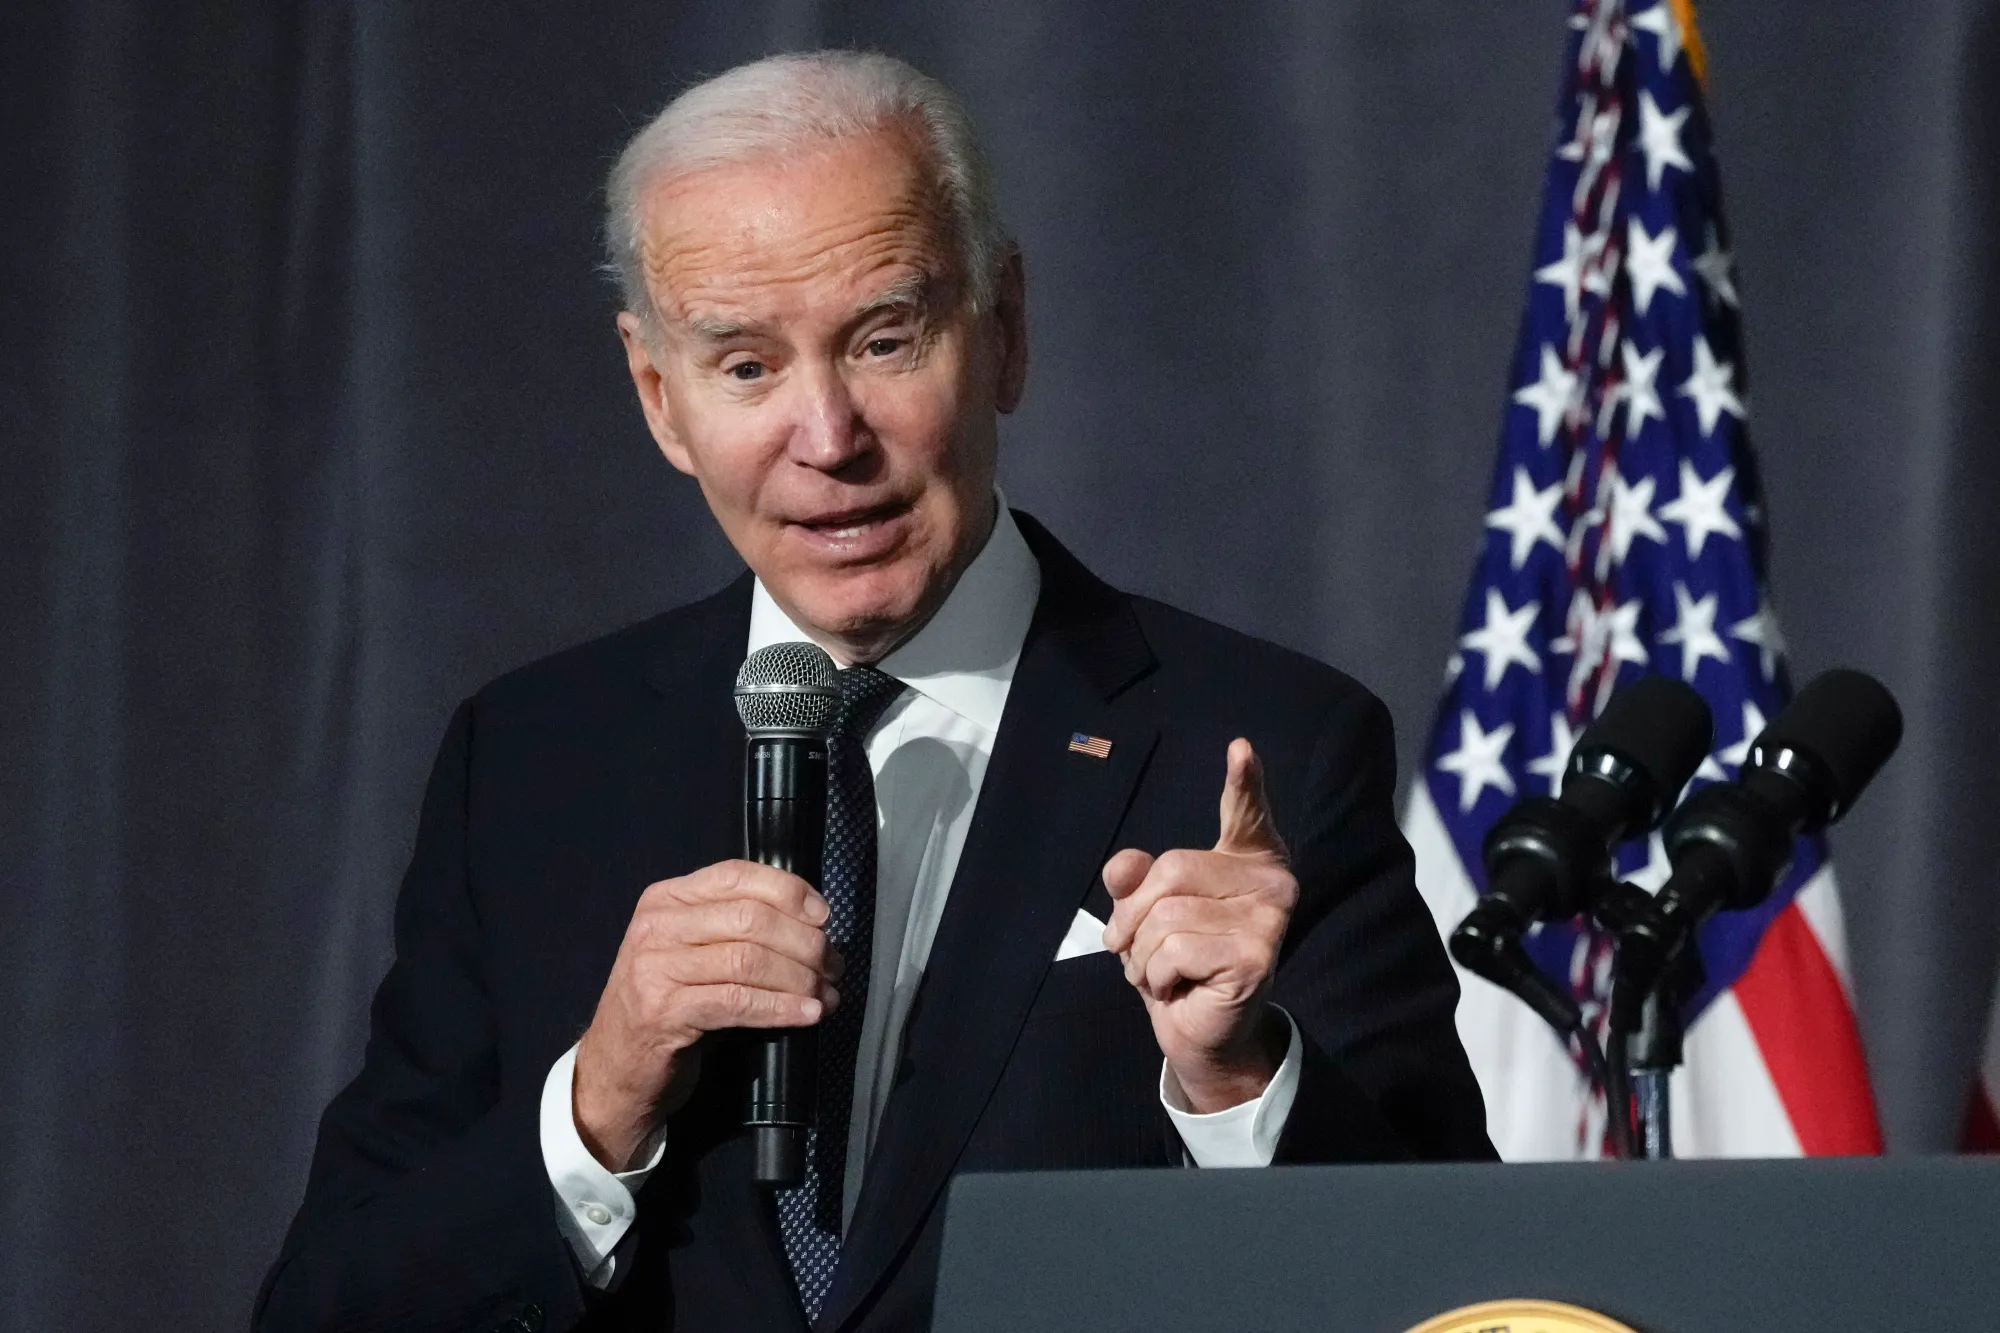 Youth Power Unites: Biden Earns Big Endorsement! They Believe in His Achievements, Not His Age!